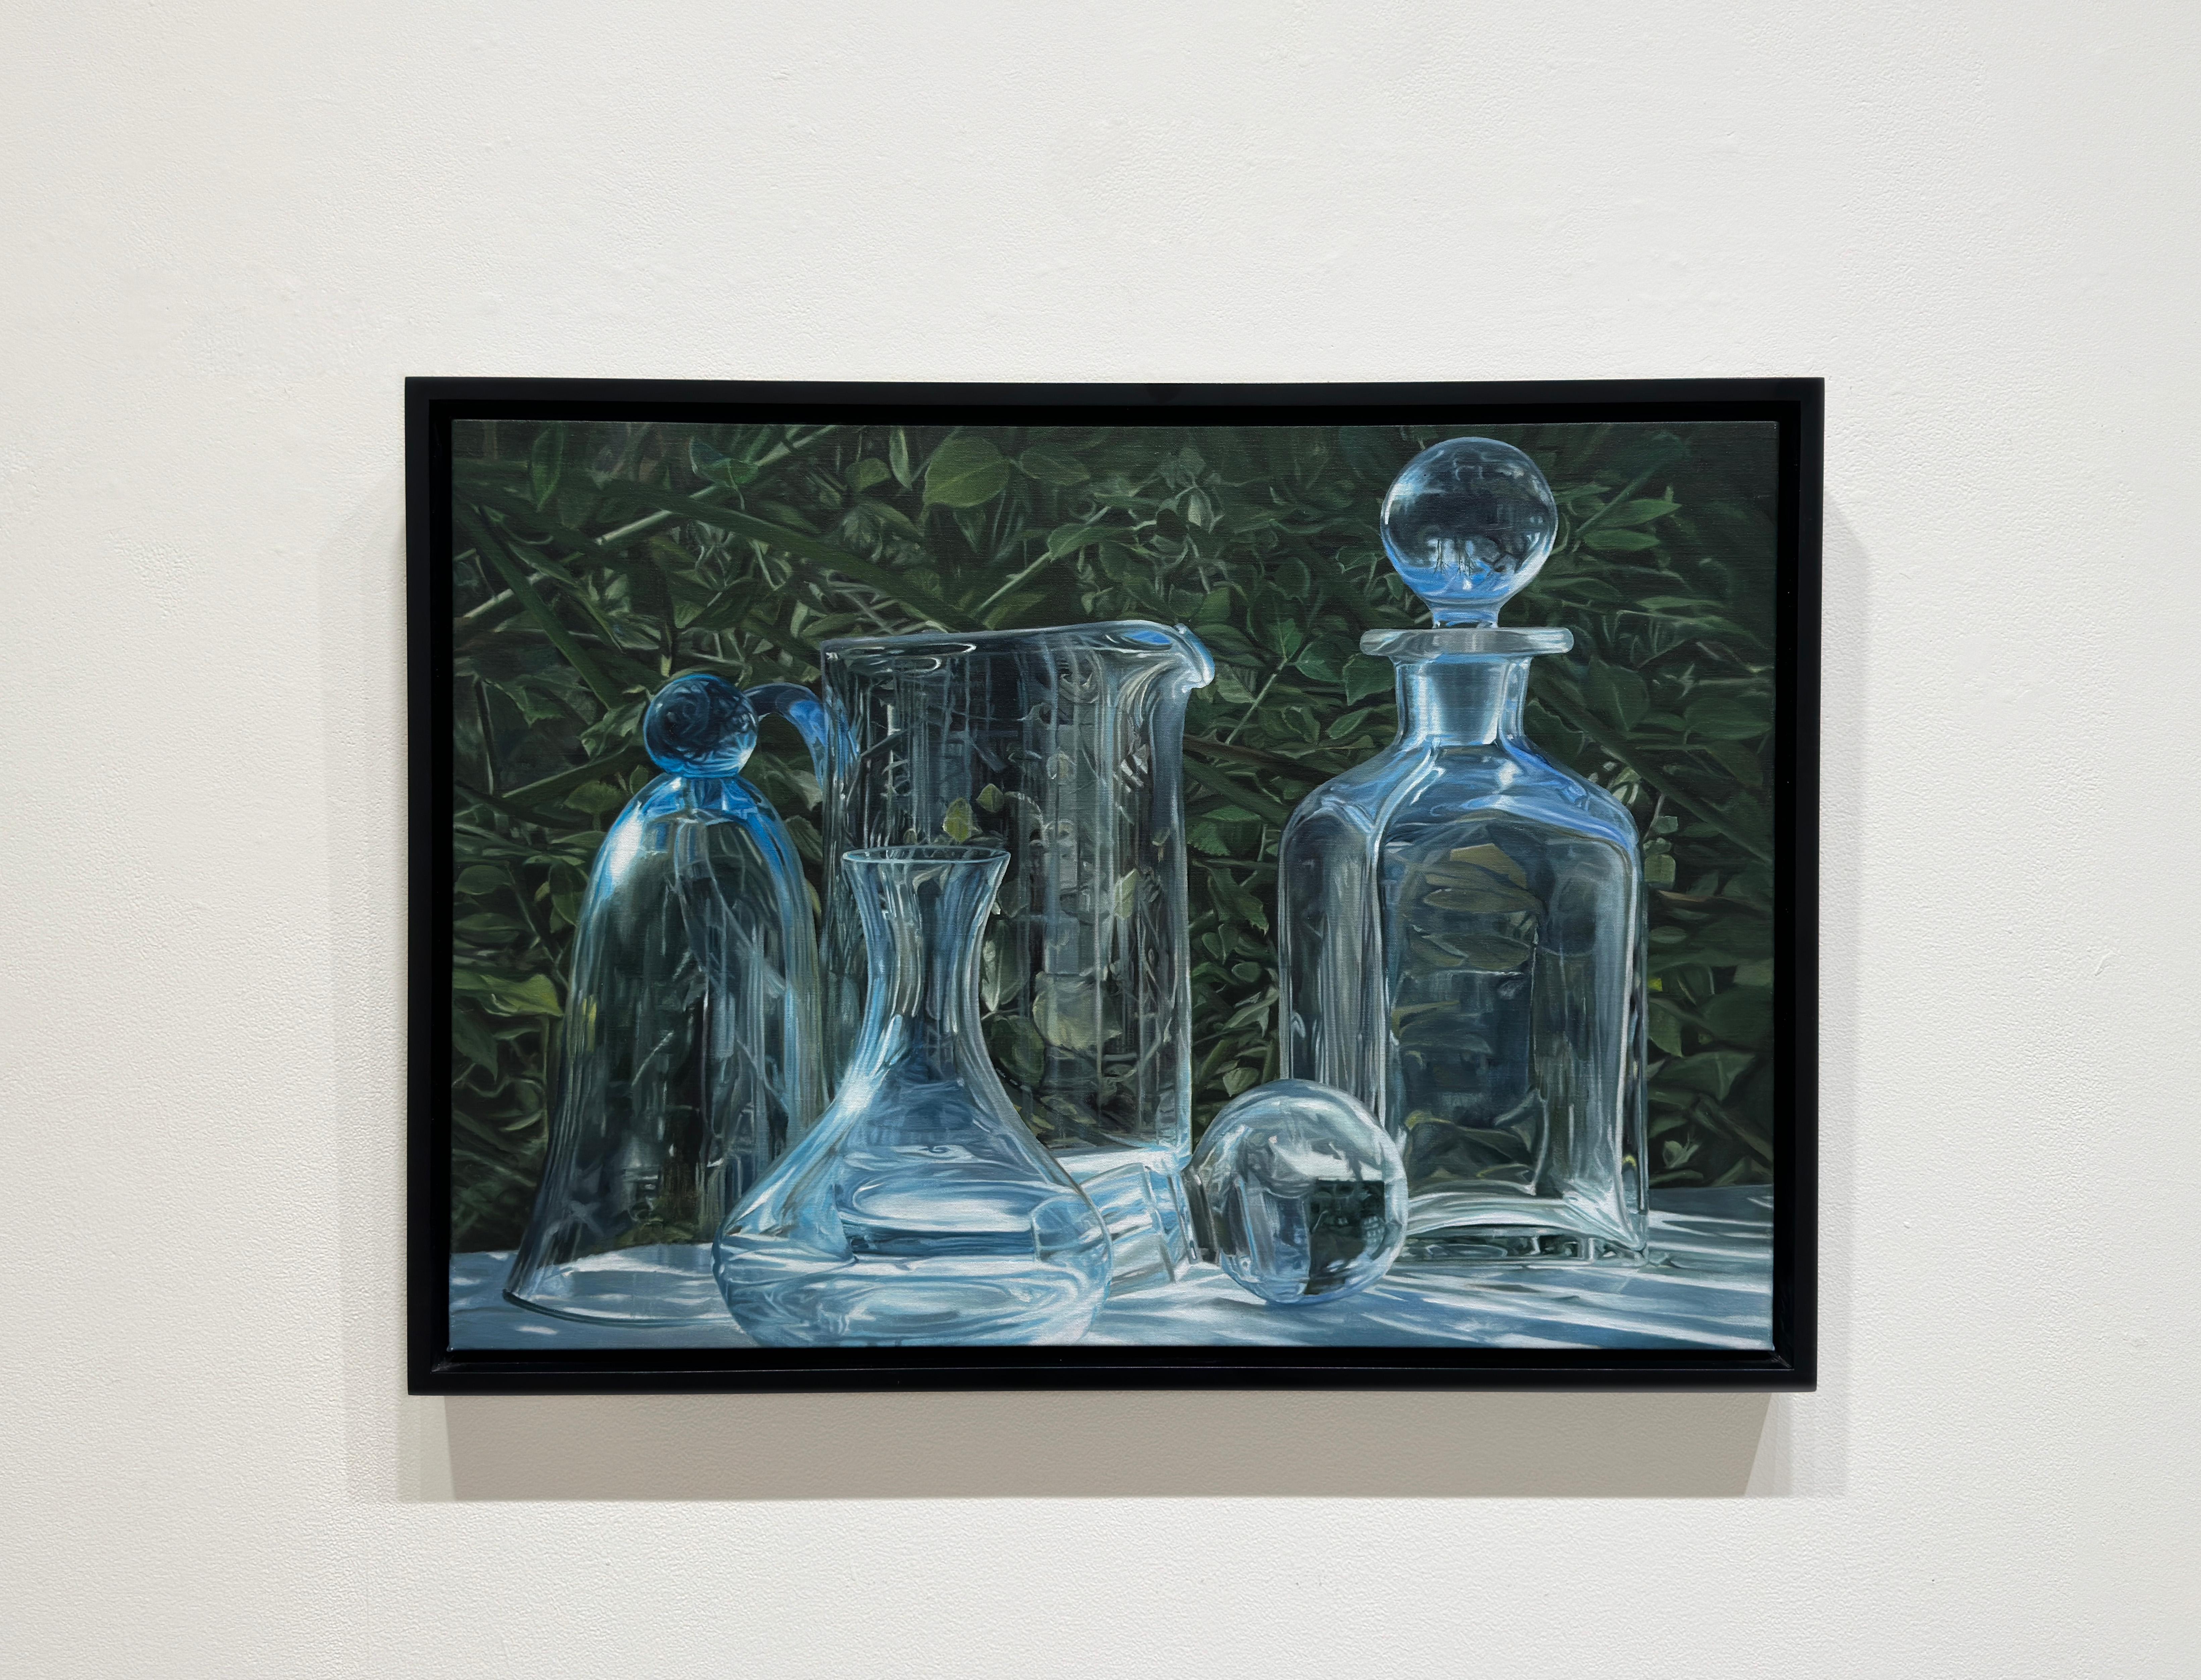 RAMBLE ON - Photorealism / Glass Bottles / Contemporary Still Life - Painting by Steve Smulka